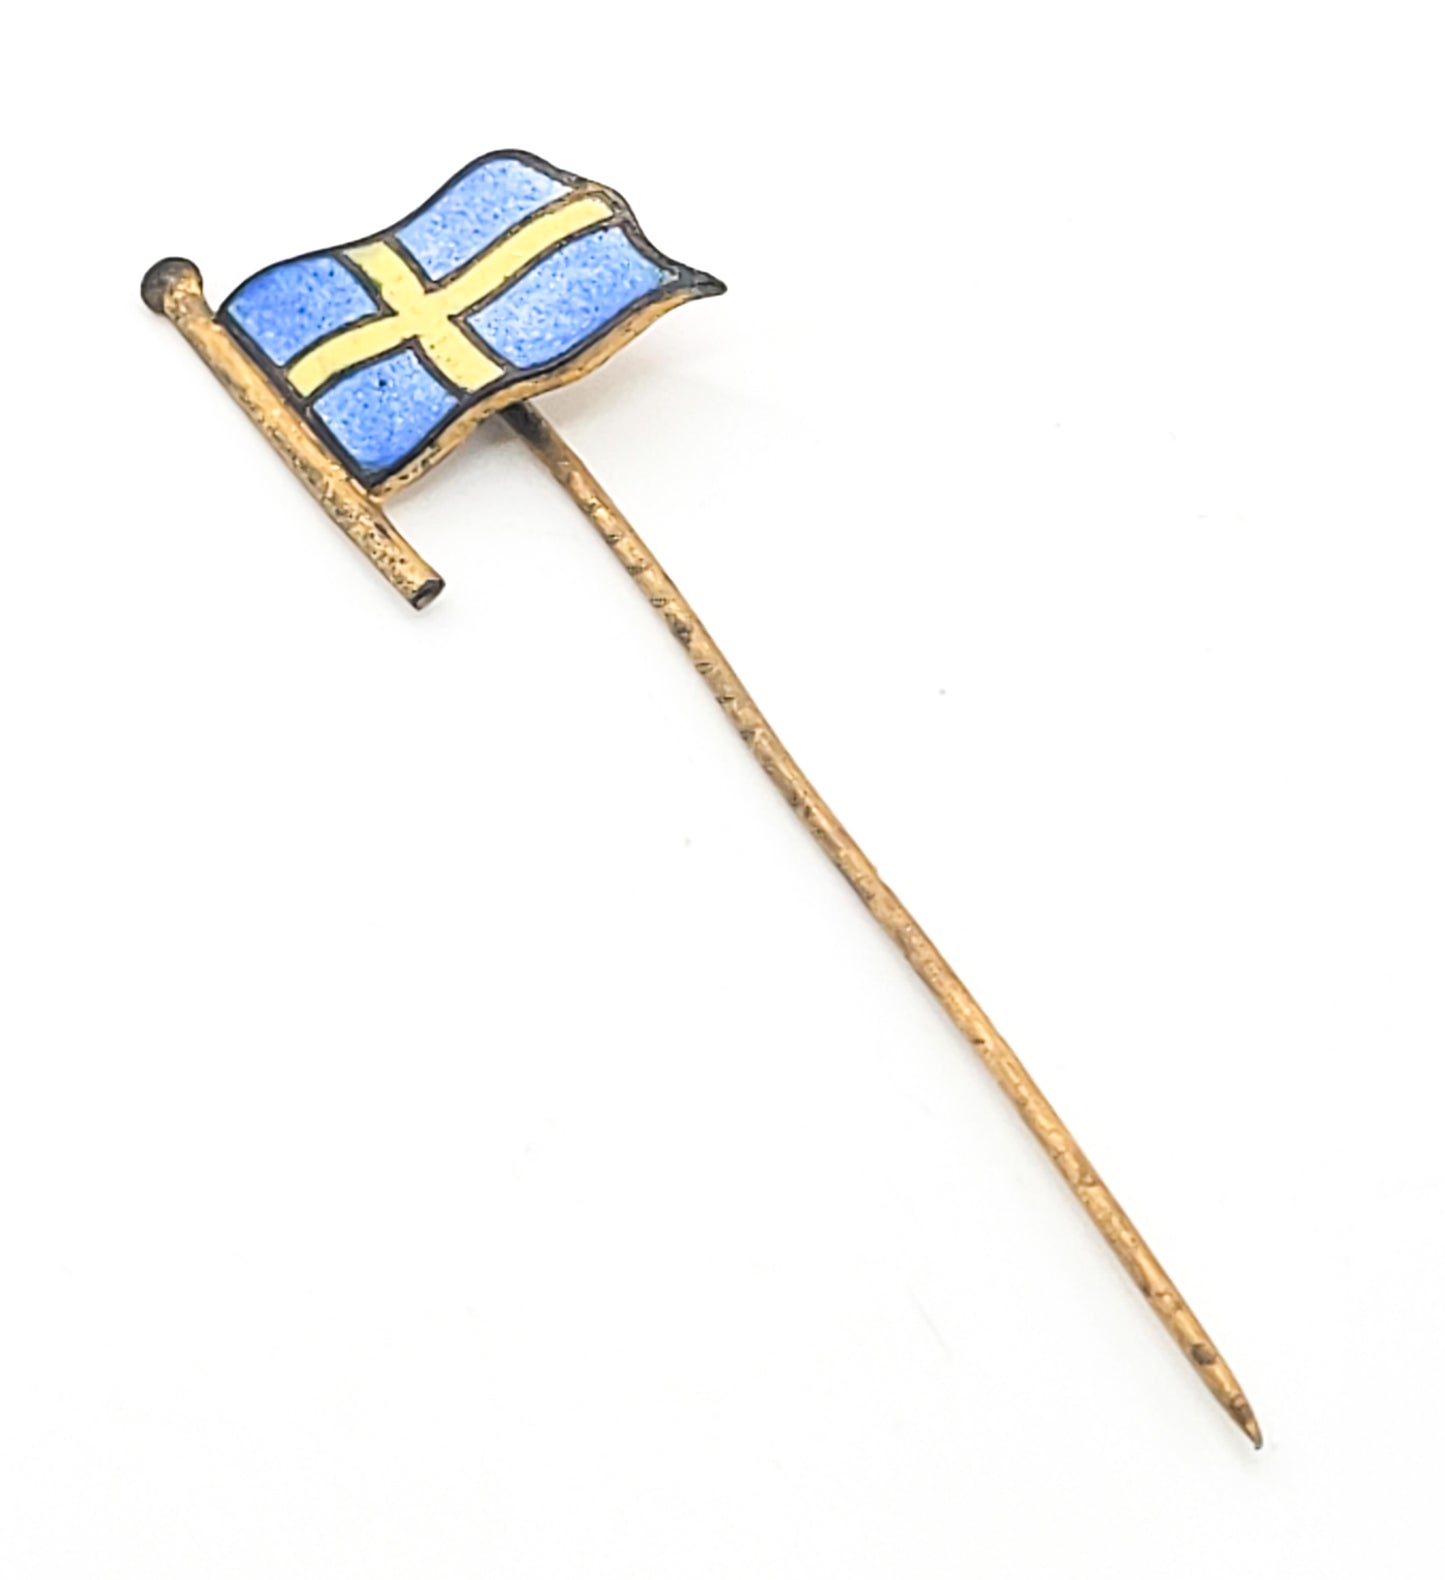 Sweden Guilloche blue and yellow enamel vintage Swedish flag stick hat lapel pin